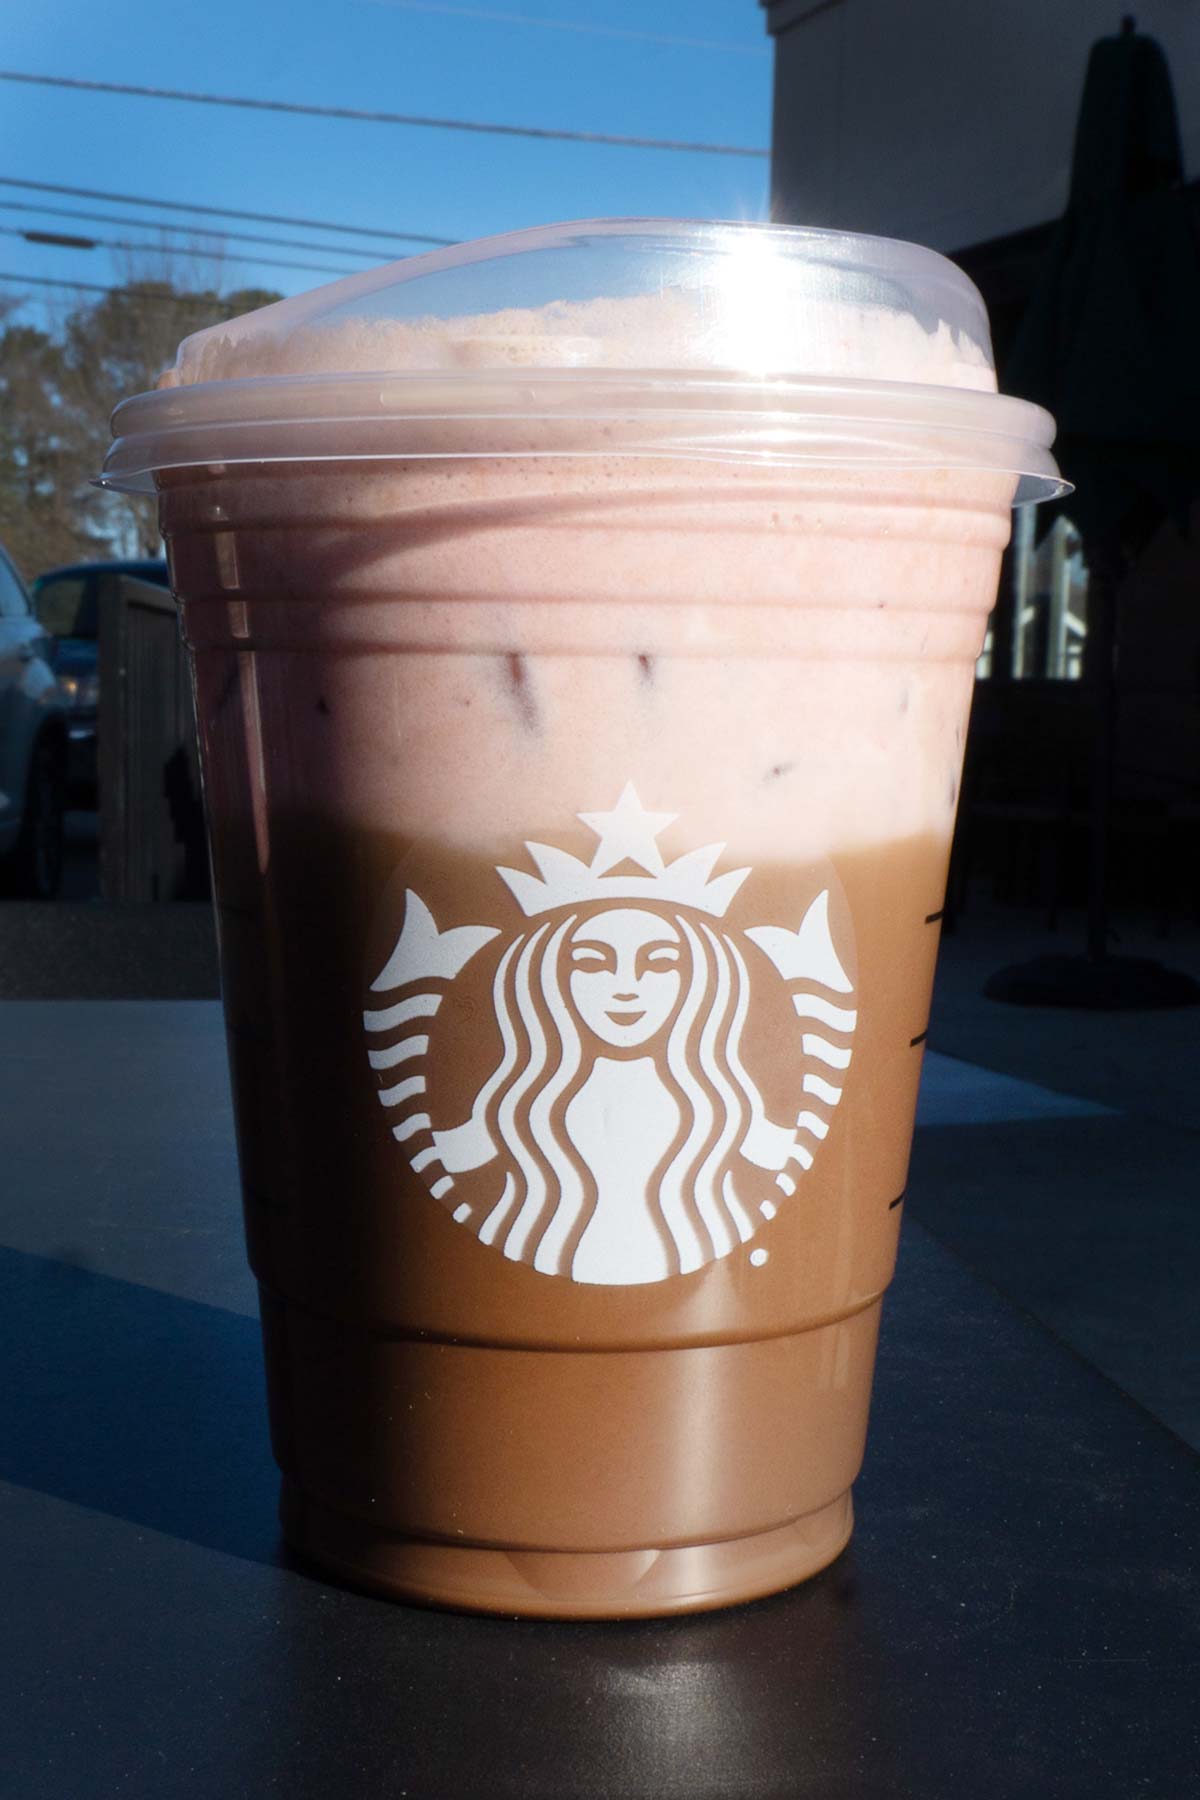 Grande sized Starbucks layered mocha and strawberry drink in a cup with a lid.